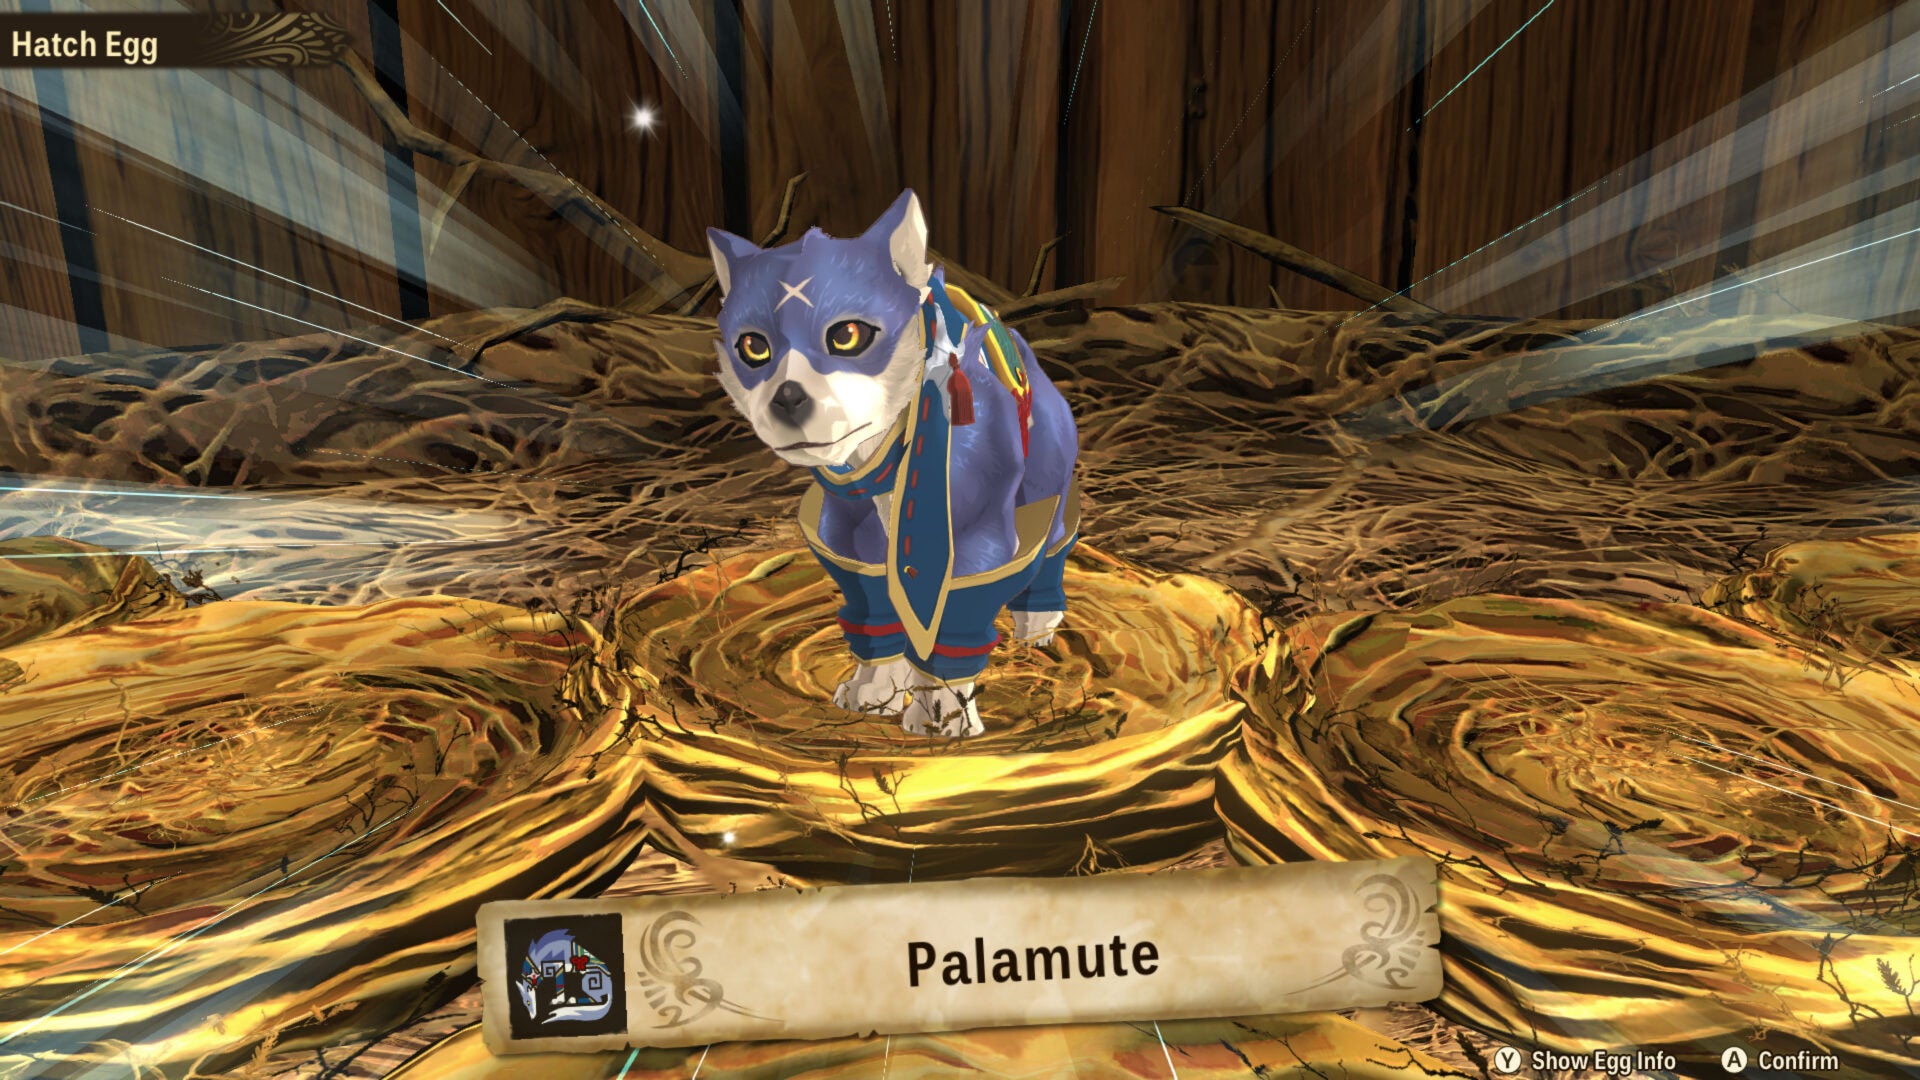 An image of a recently hatched Palamute from Monster Hunter Stories 2. It's a cute blue pup stood inside a little straw nest.